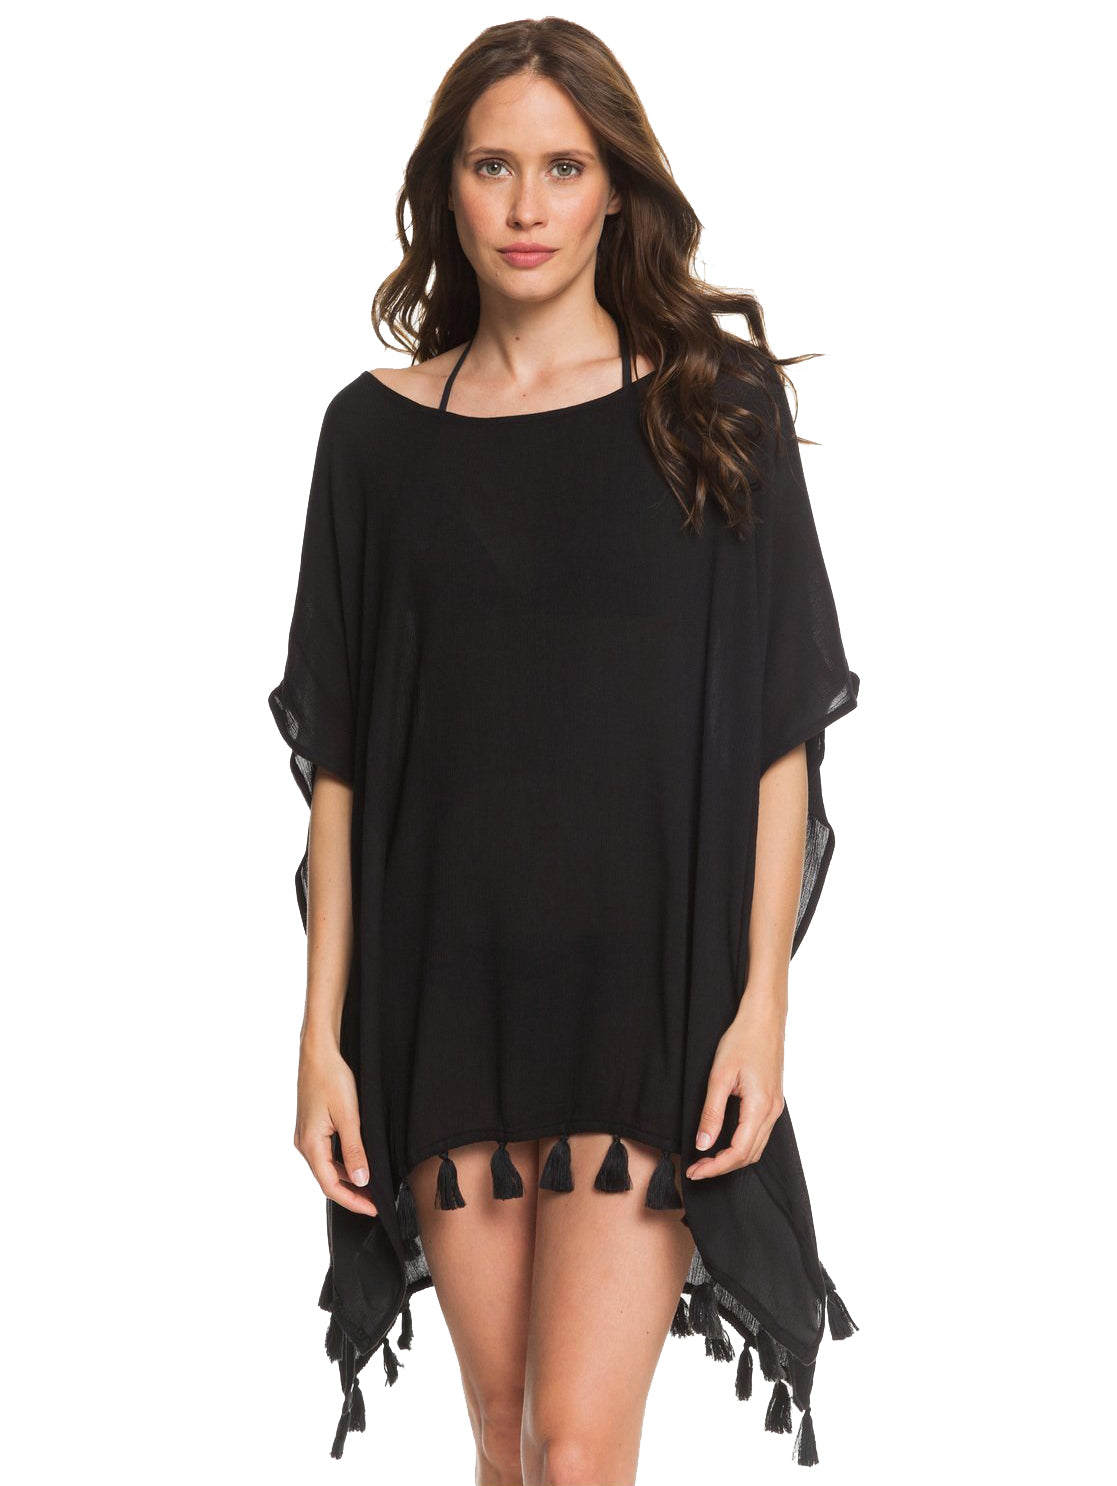 Roxy Make Your Soul Beach Cover-Up KVJ0 XS/S